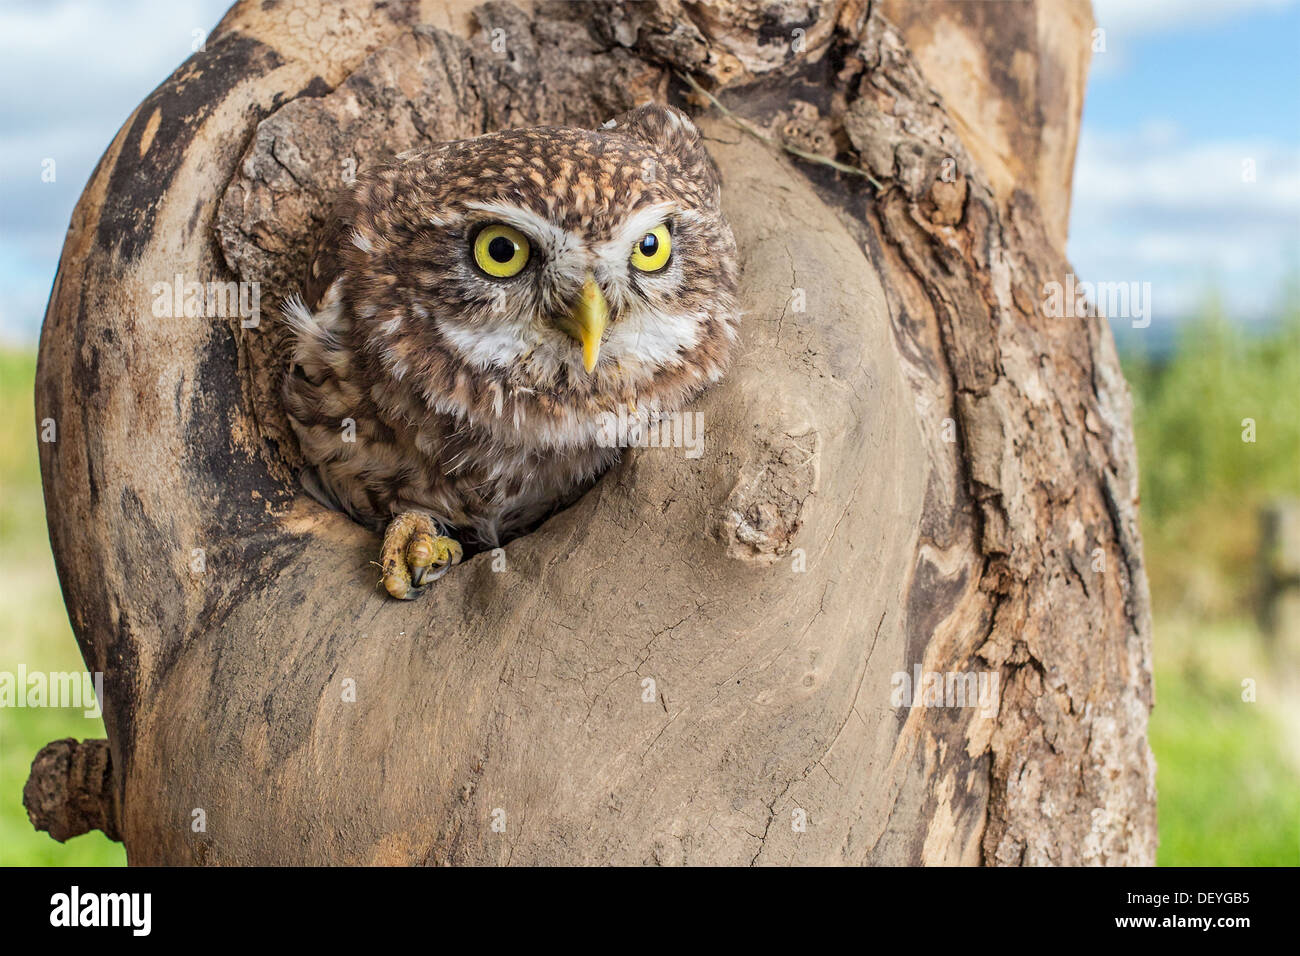 Little owl (Athene noctua) peering out from hollow in a tree stump Stock Photo